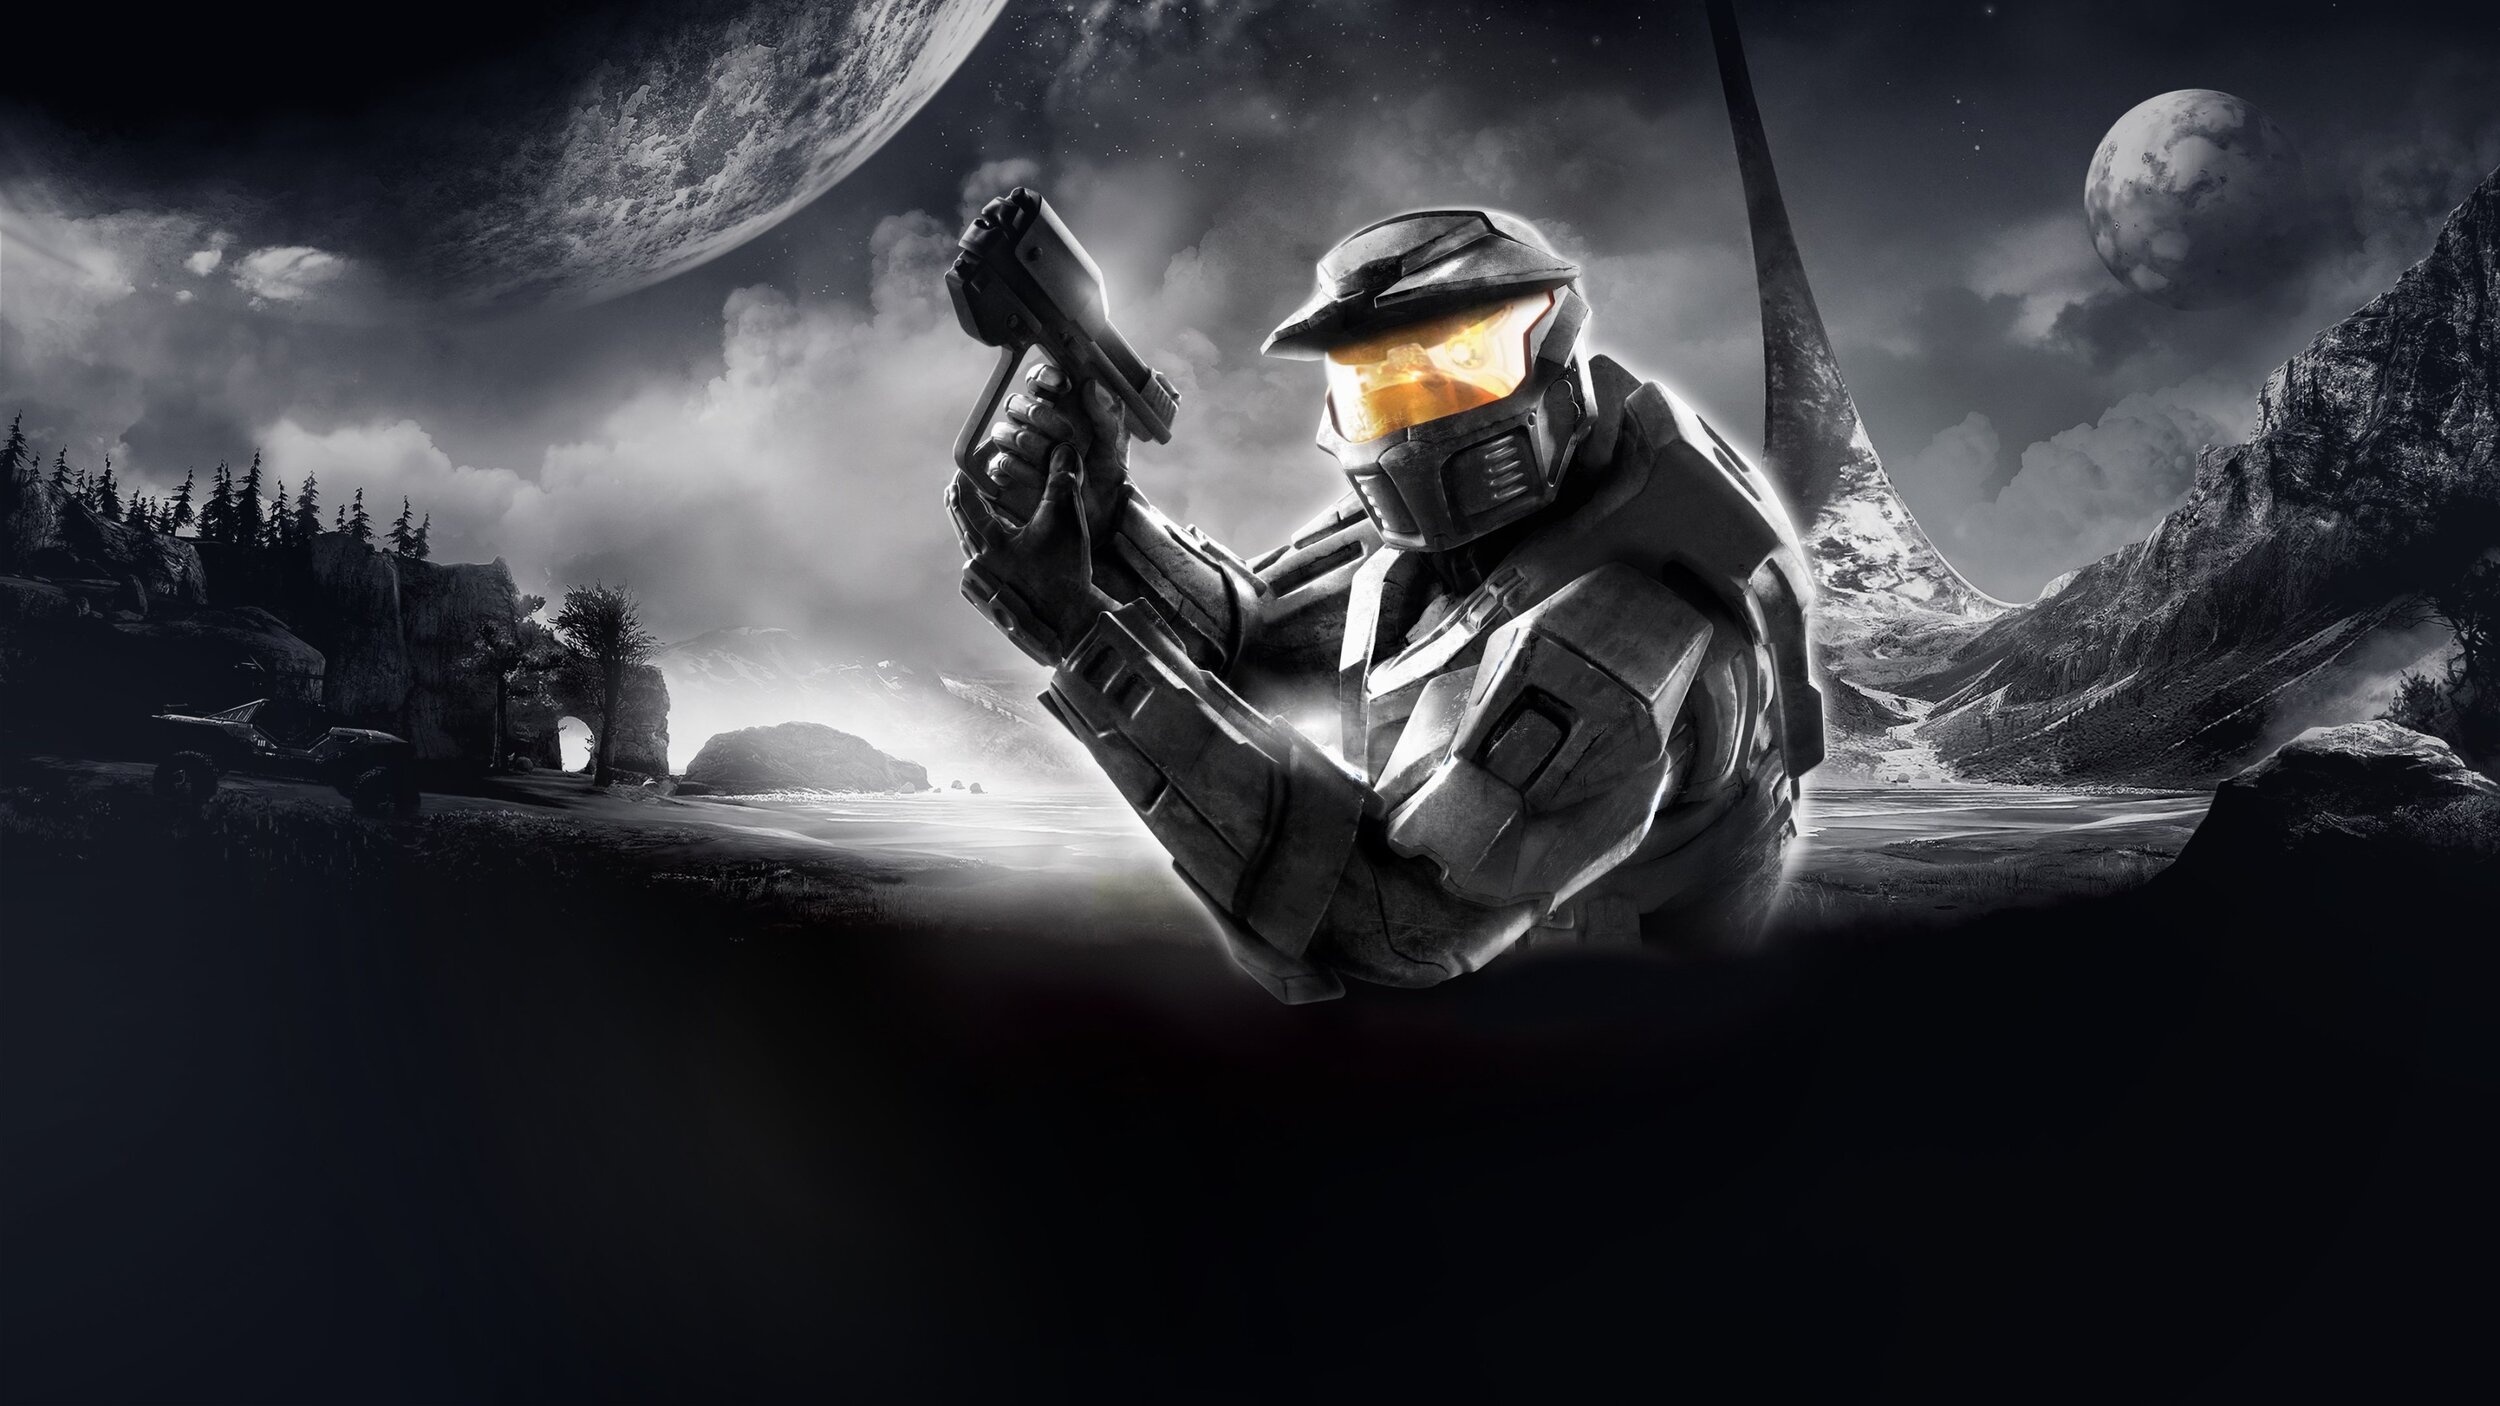 Previously on Halo, Halo CE's impact, Campaign reminiscence, Master Chief's journey, 2500x1410 HD Desktop